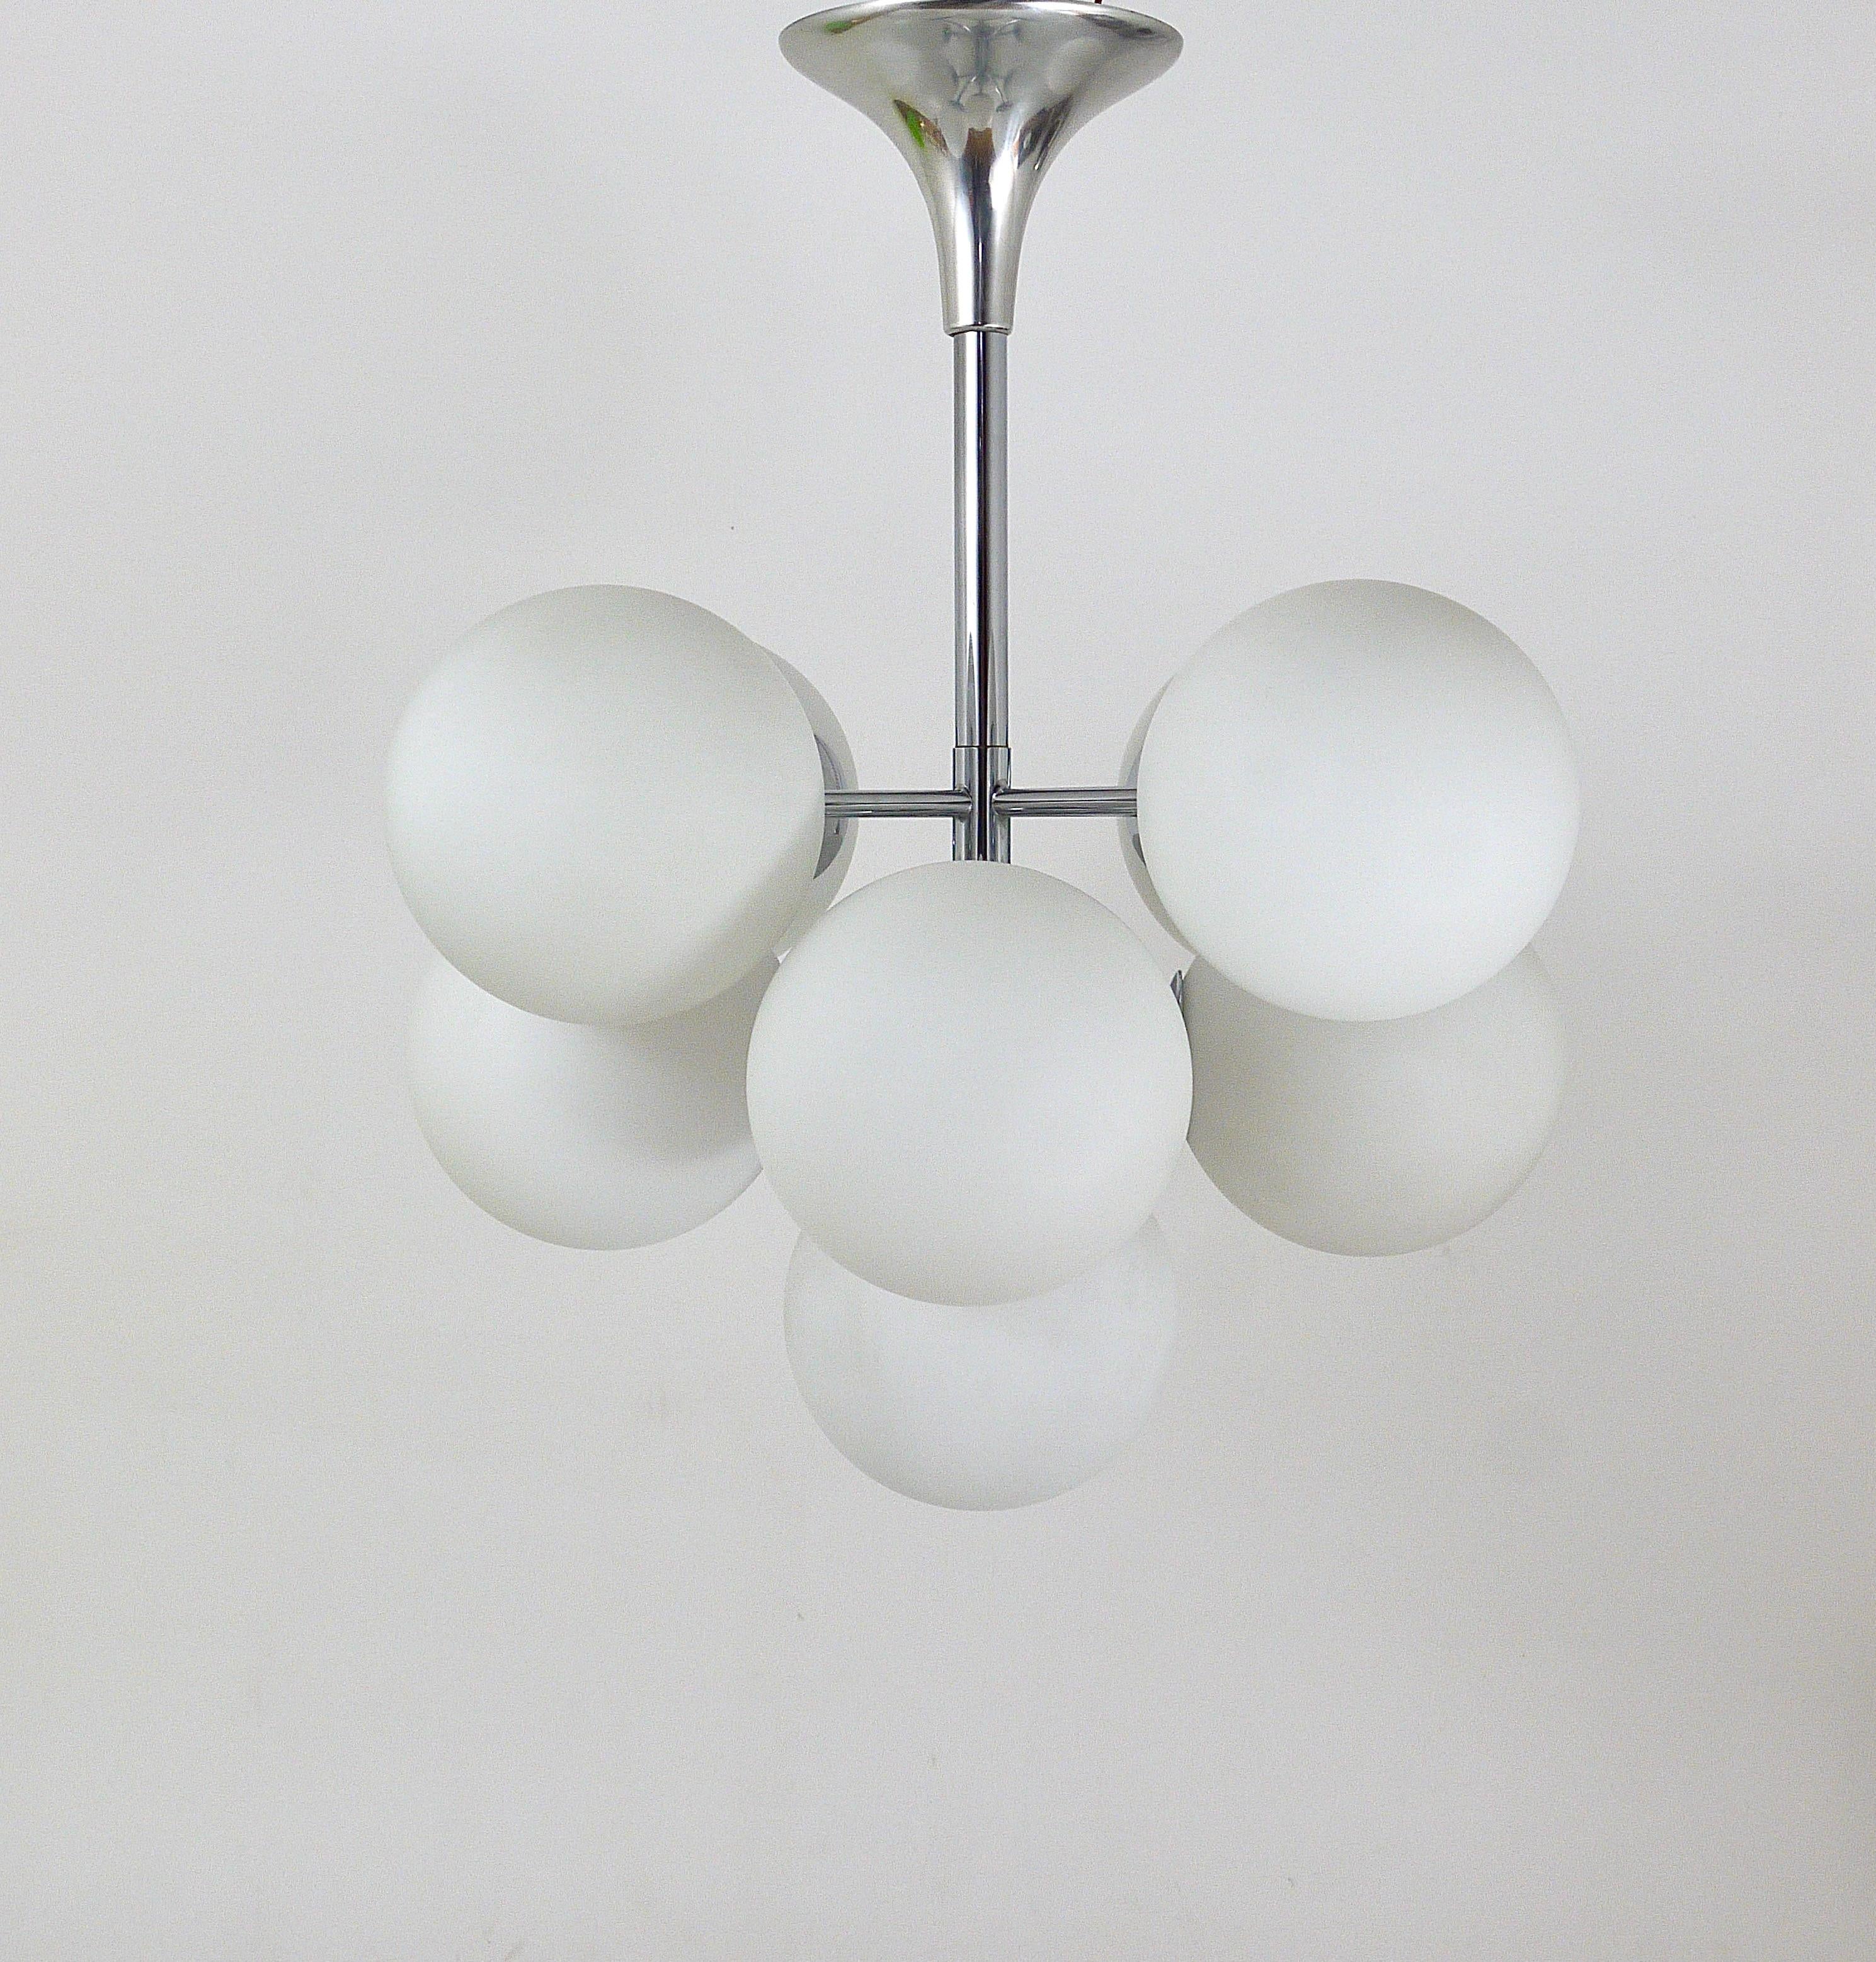 Chromed Atomic Chandelier with White Glass Globes, Temde, Switzerland For Sale 4